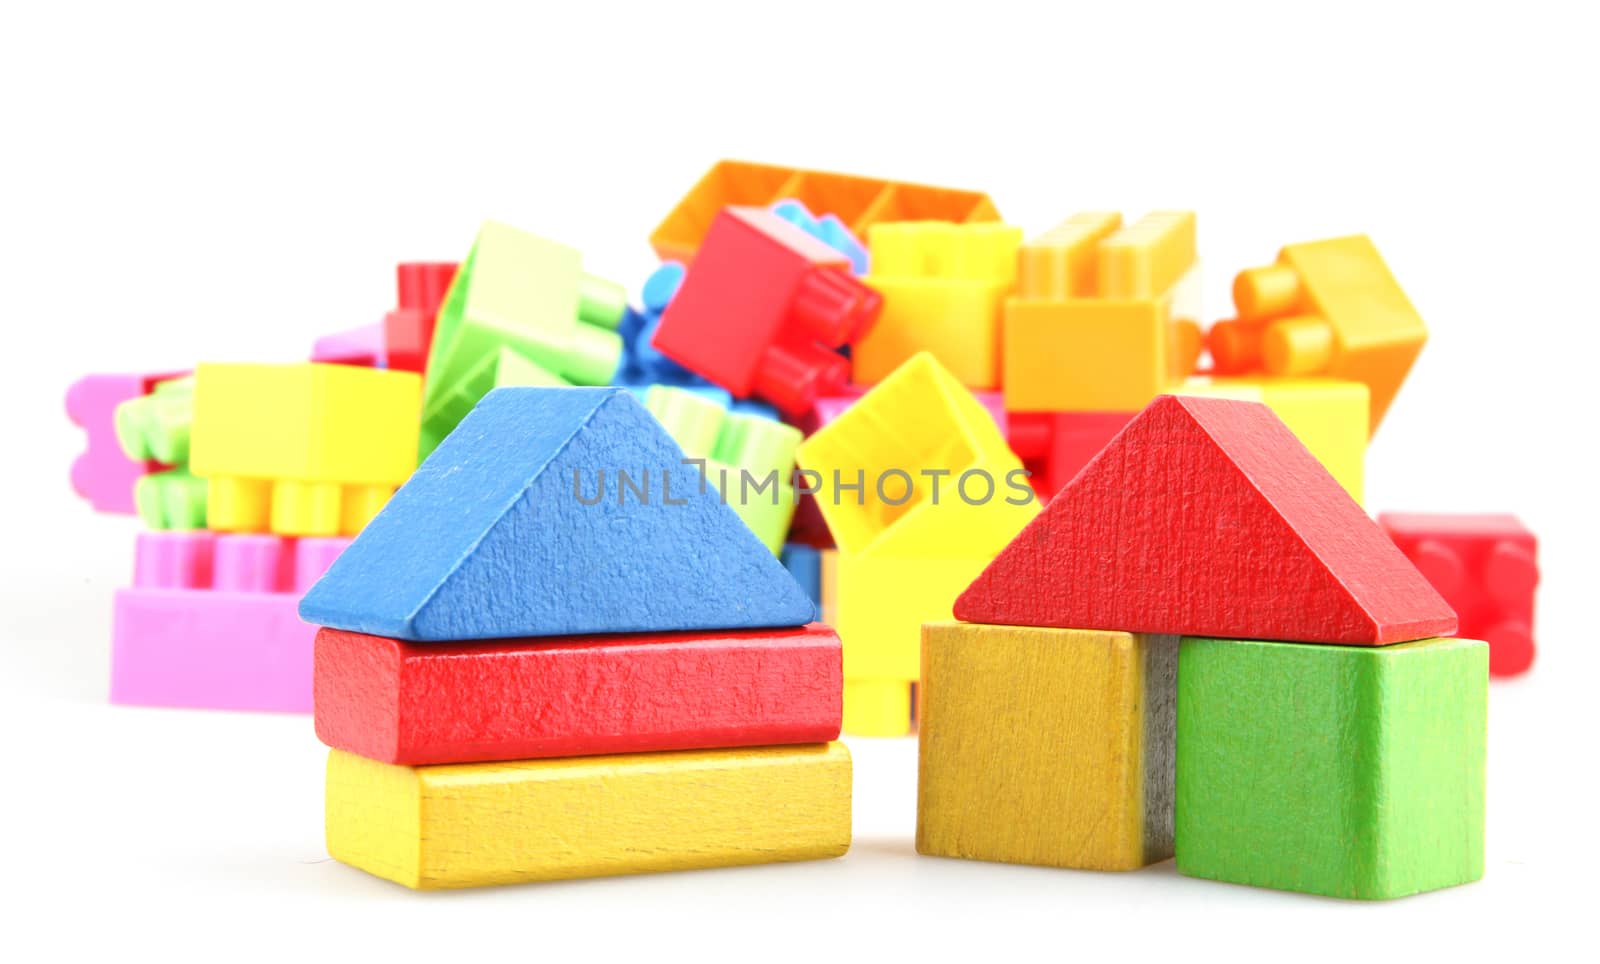 Wooden building blocks by nenovbrothers